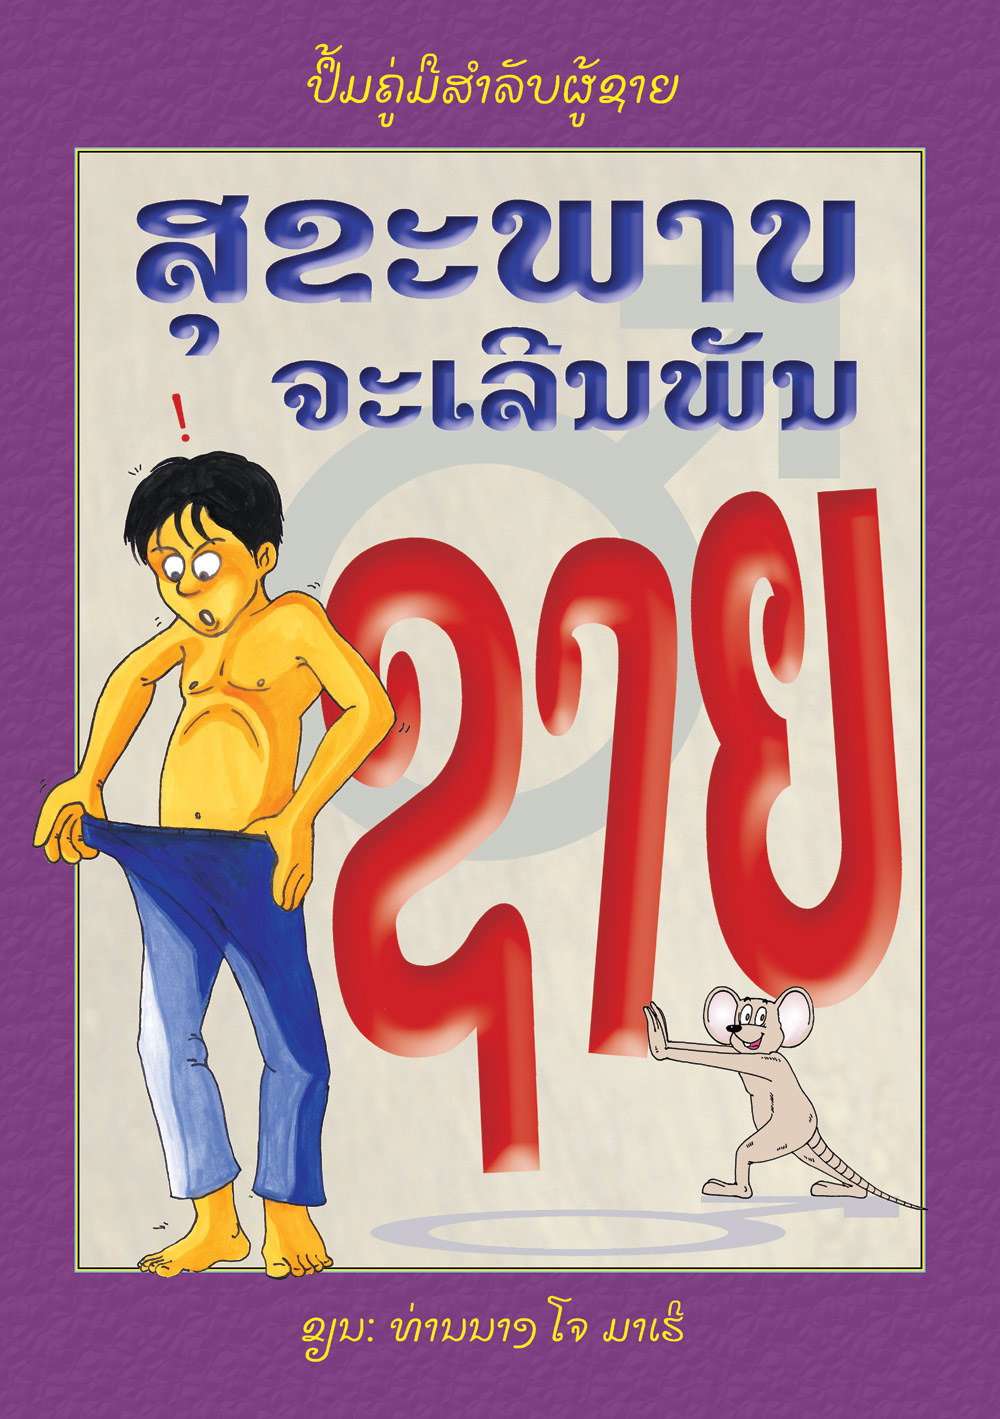 Men's Health large book cover, published in Lao language